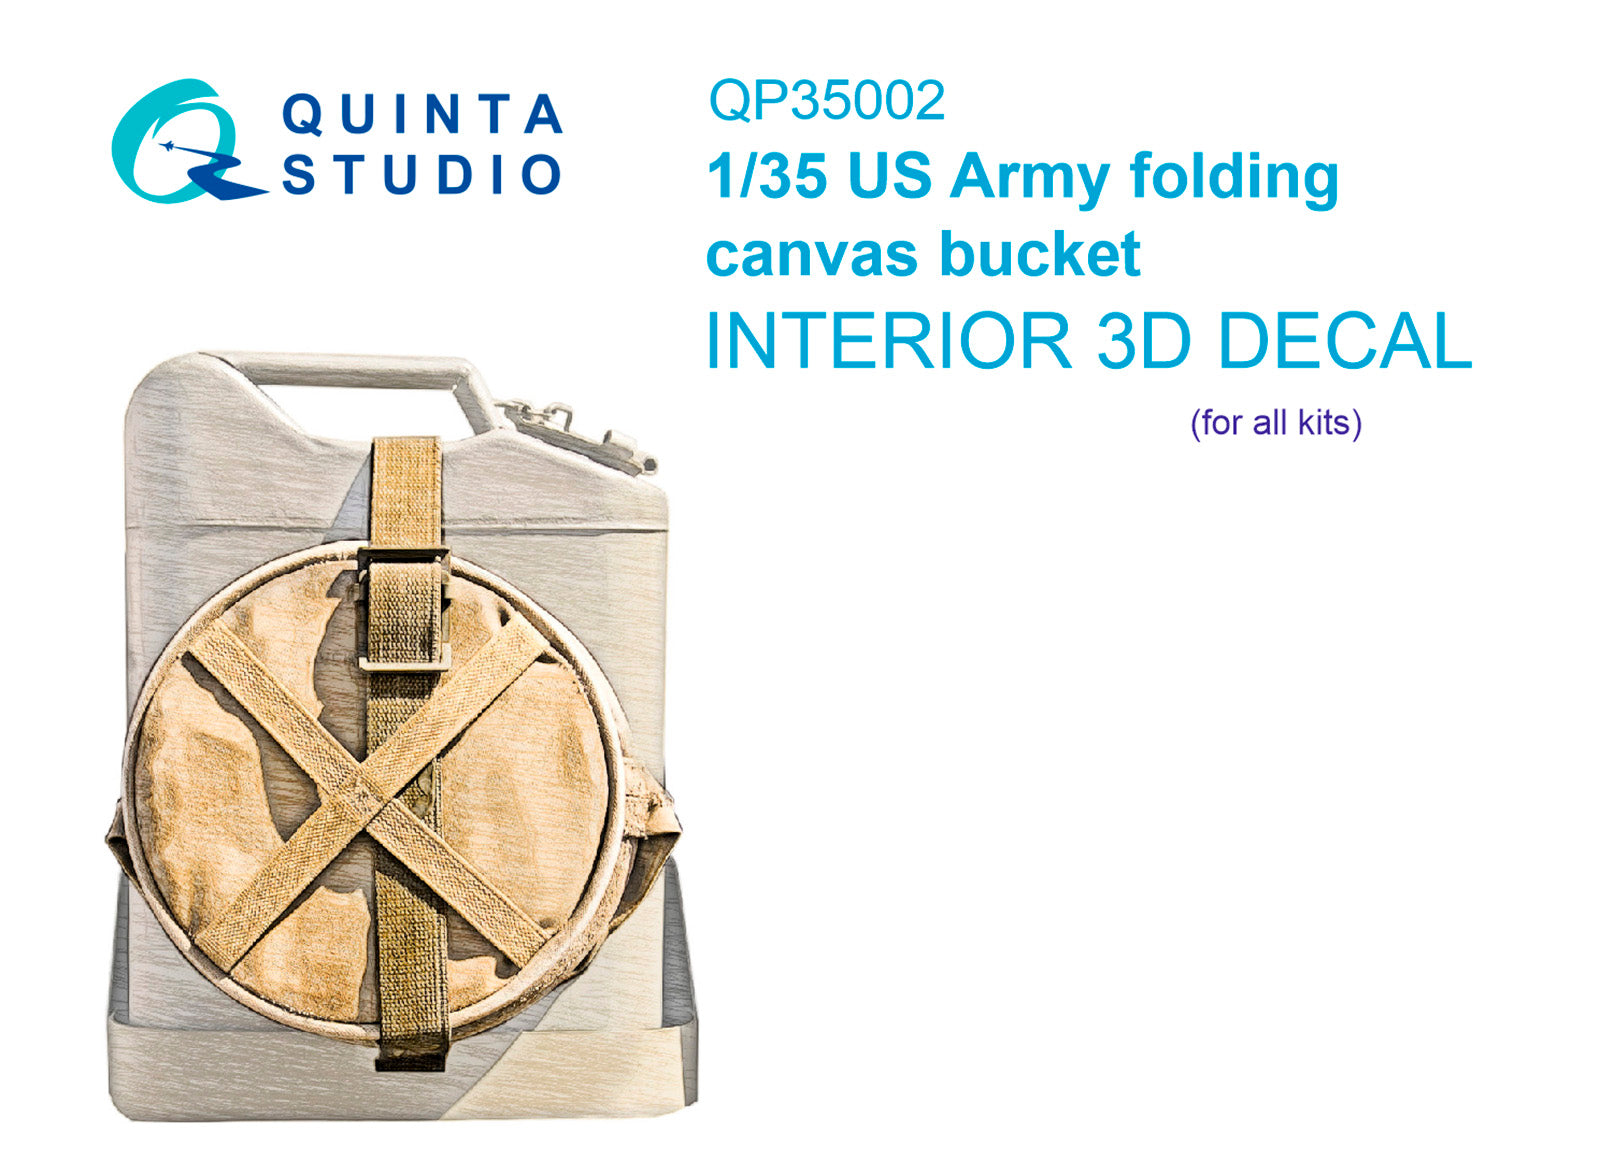 Quinta Studio - 1/35 US Army folding canvas bucket QP35002 for all kits